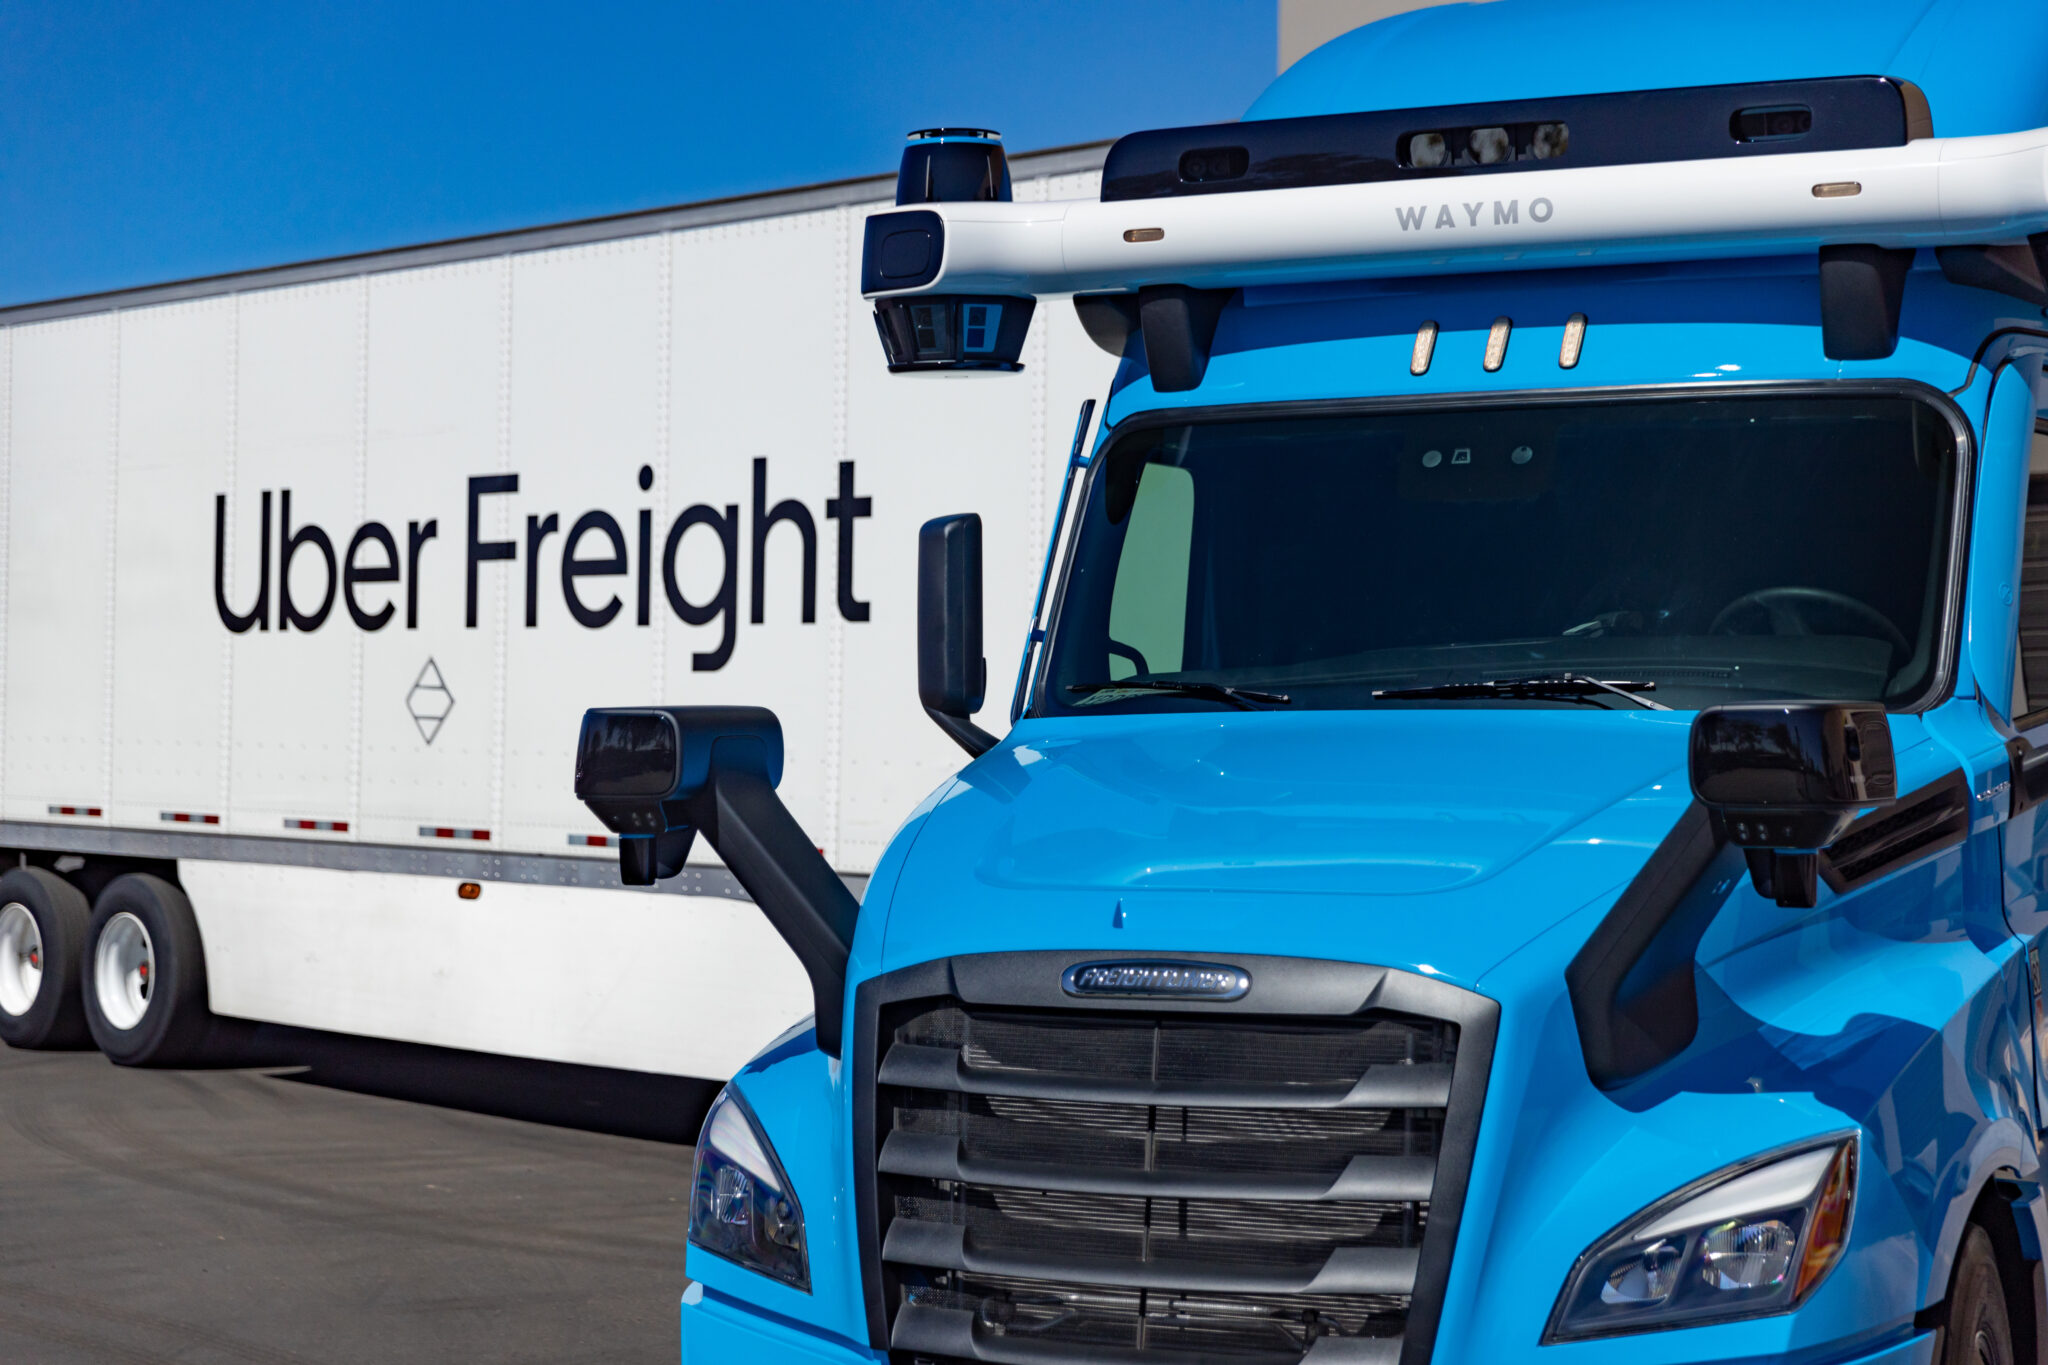 Uber Freight and Waymo Via partner to accelerate the future of logistics Fleet News Daily